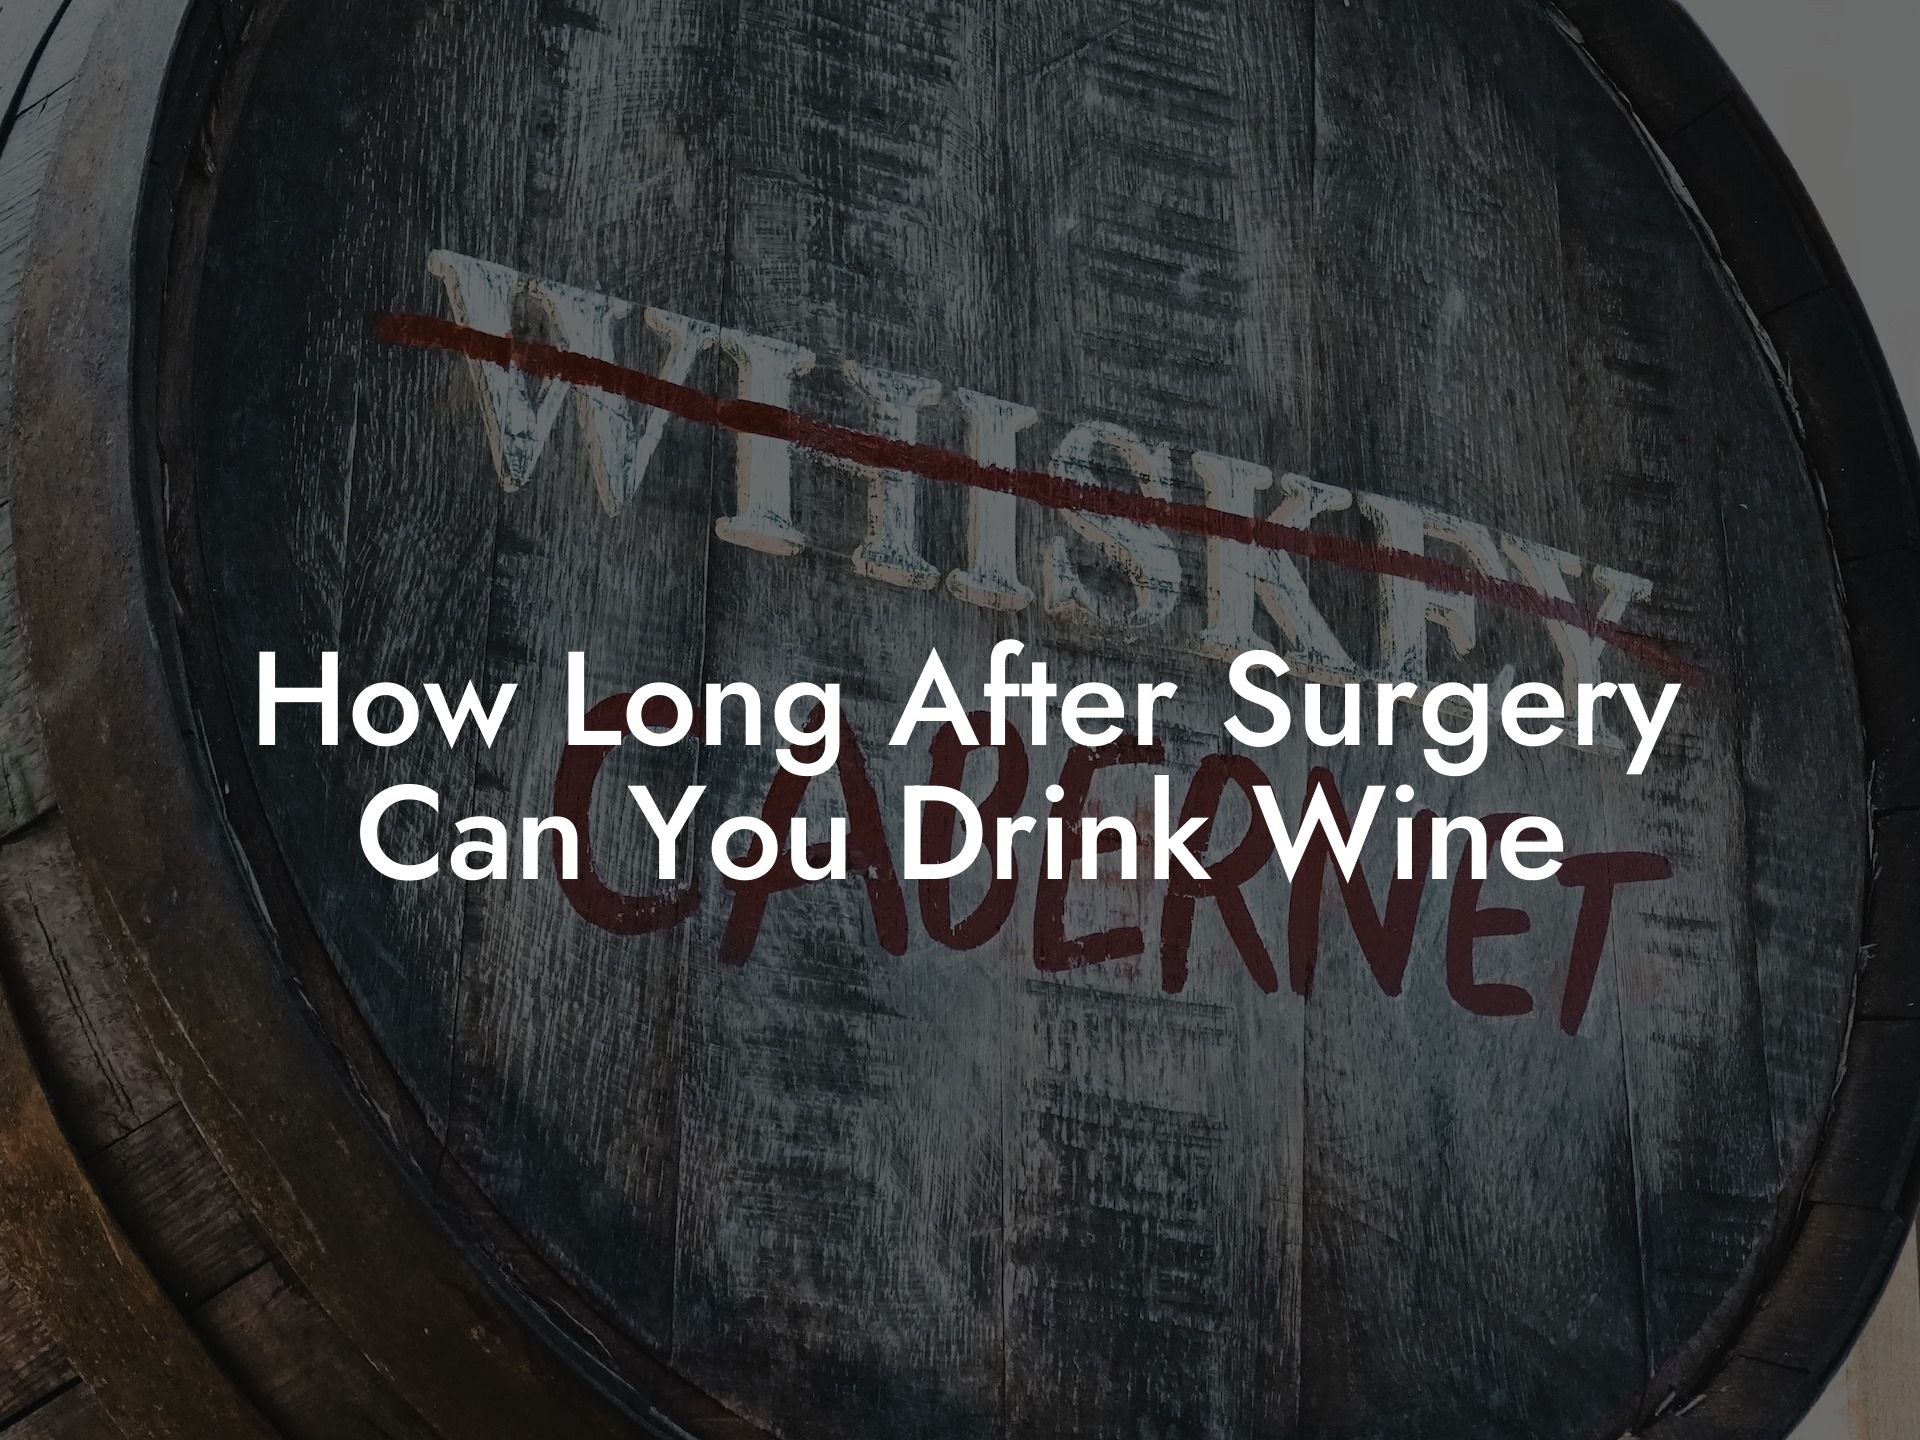 How Long After Surgery Can You Drink Wine